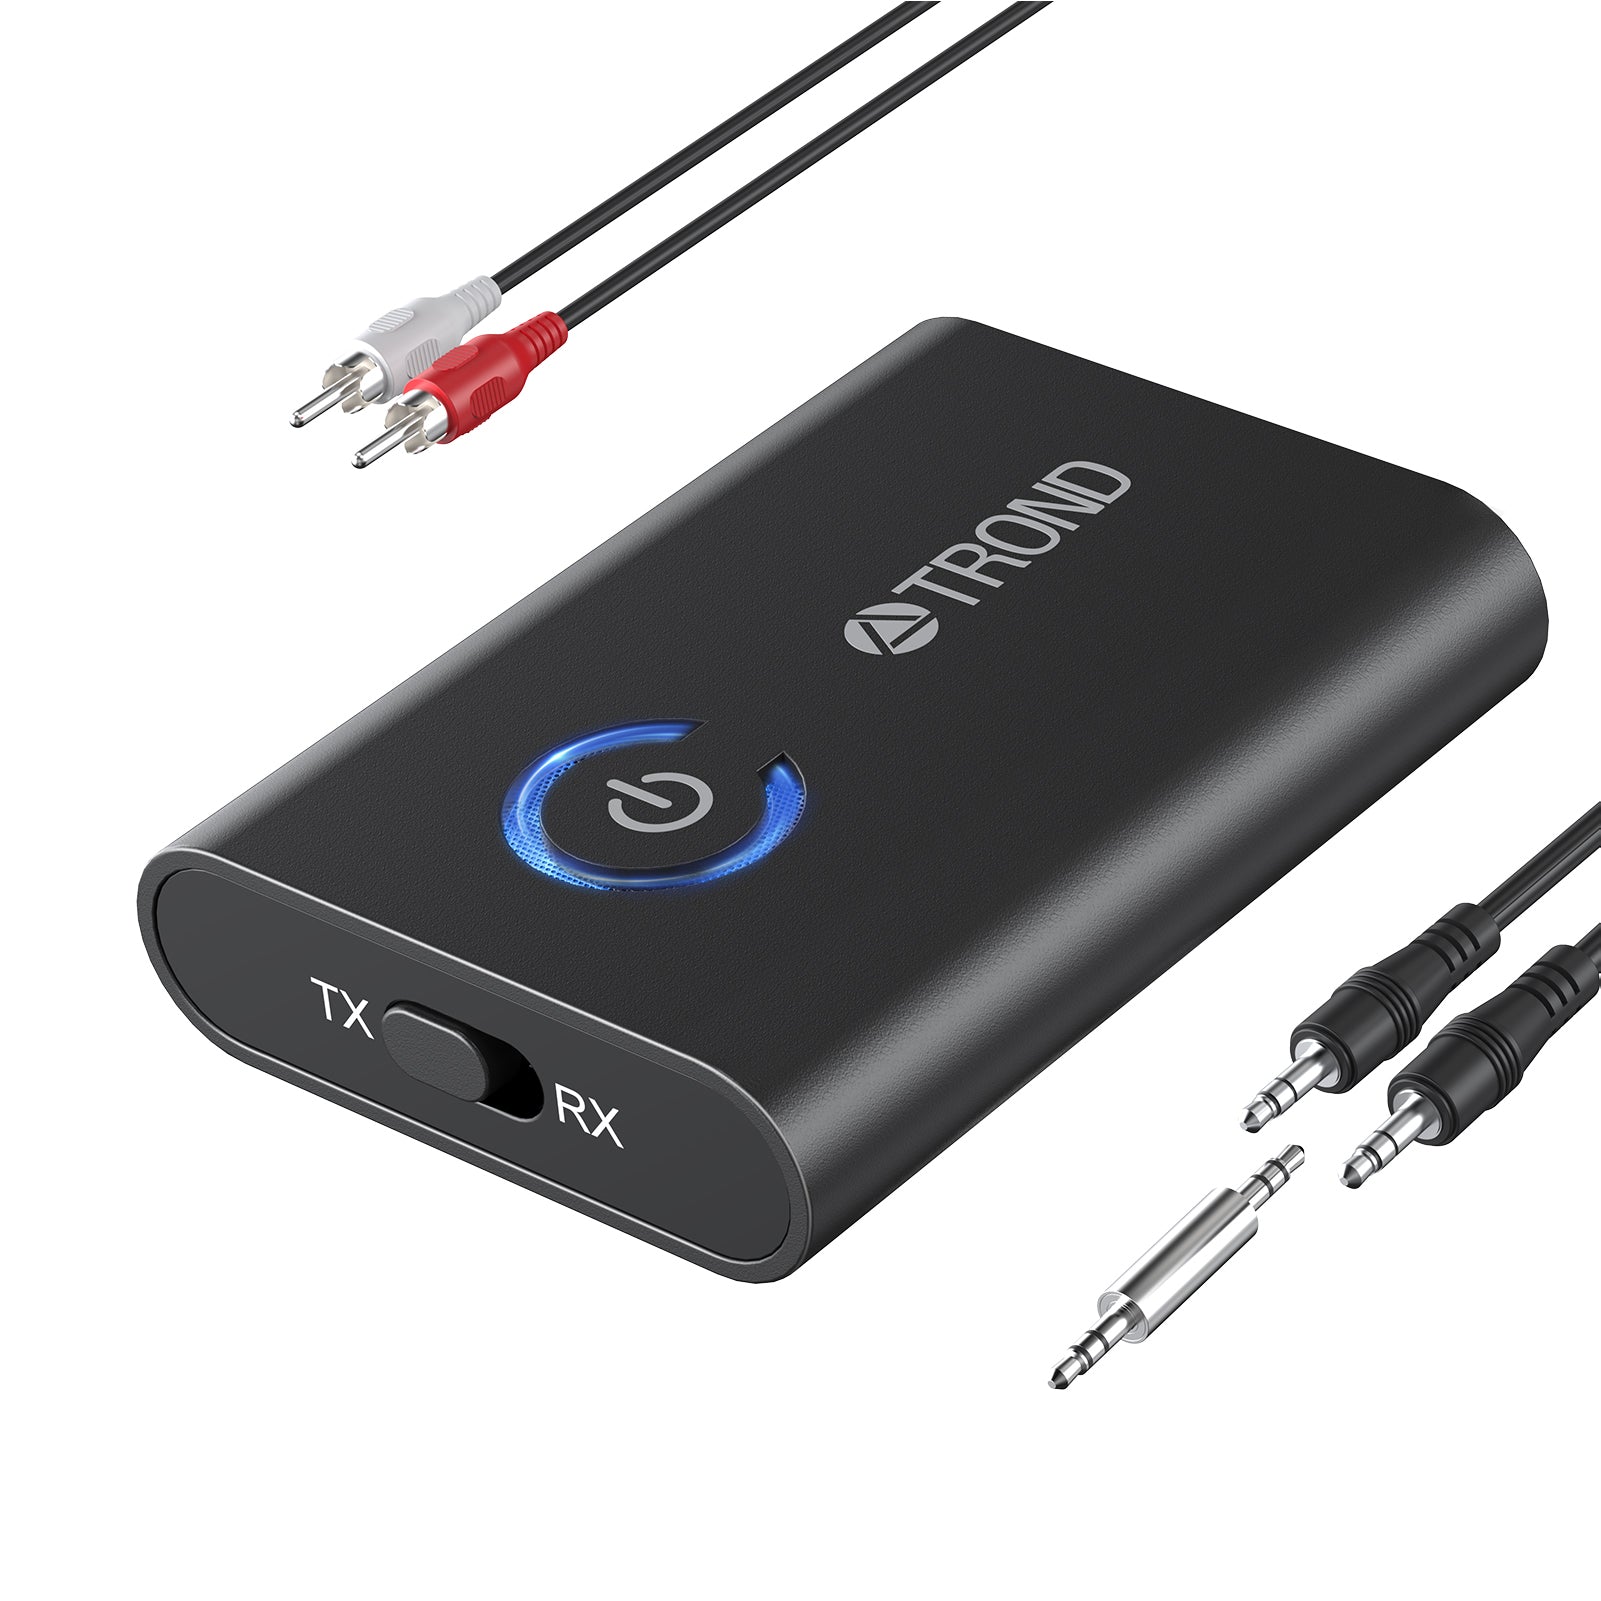 ByDiffer Dual Link Bluetooth 5.0 Audio Transmitter Receiver Sharing for up  2 Headphones, 3 in 1 Aptx Low Latency Wireless Adapter Splitter for TV